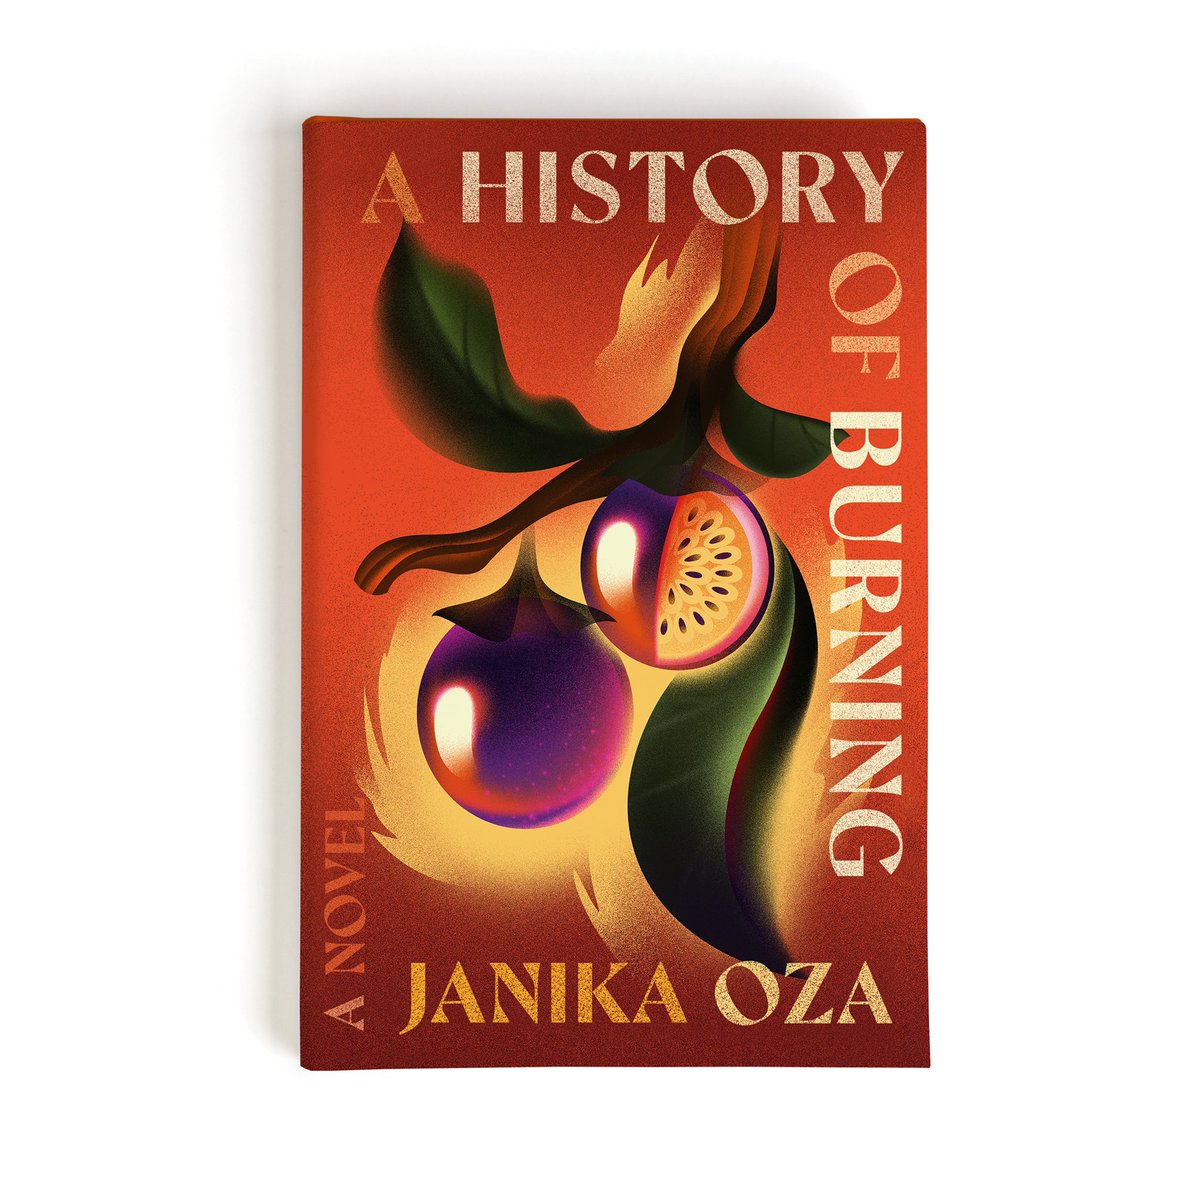 A sweeping saga of displacement and disruption — but never dissolution — for 4 generations of an Indo-Ugandan family that spans almost 100 years. It sounds like an unwieldy read; it’s not. The writing invites and envelops. A remarkable debut from @JanikaOza . ⭐️⭐️⭐️⭐️⭐️